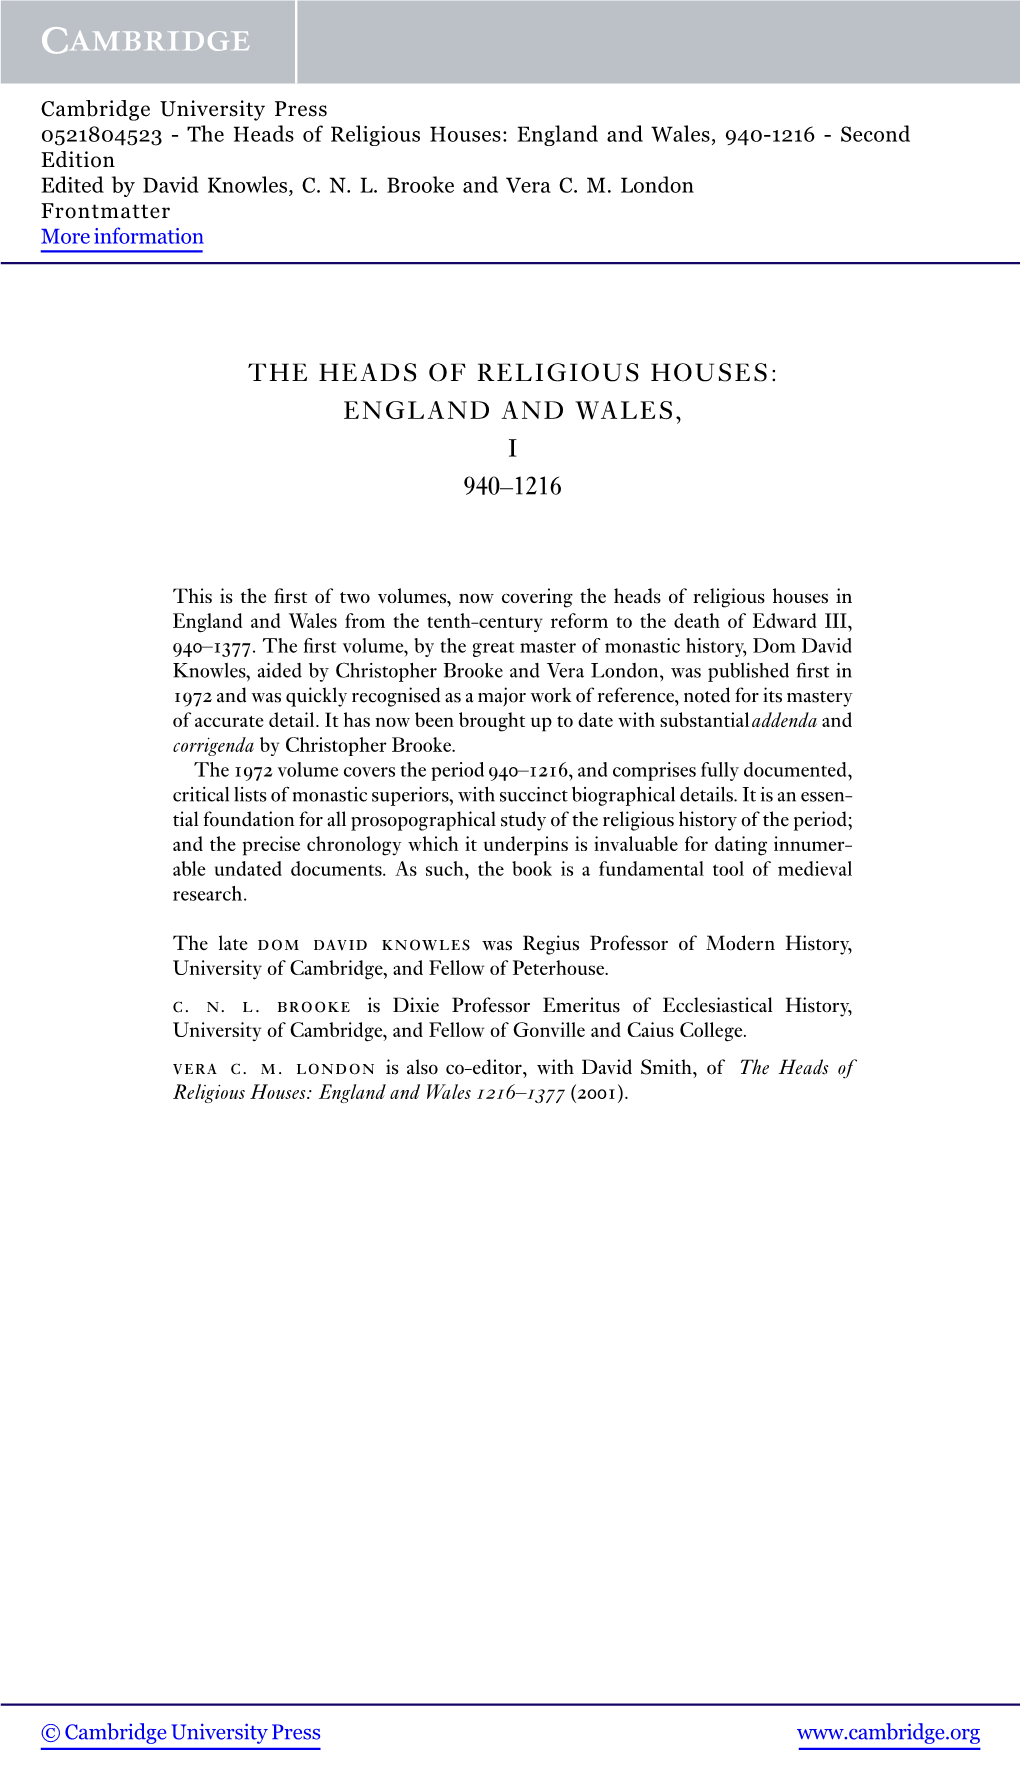 The Heads of Religious Houses: England and Wales, 940-1216 - Second Edition Edited by David Knowles, C